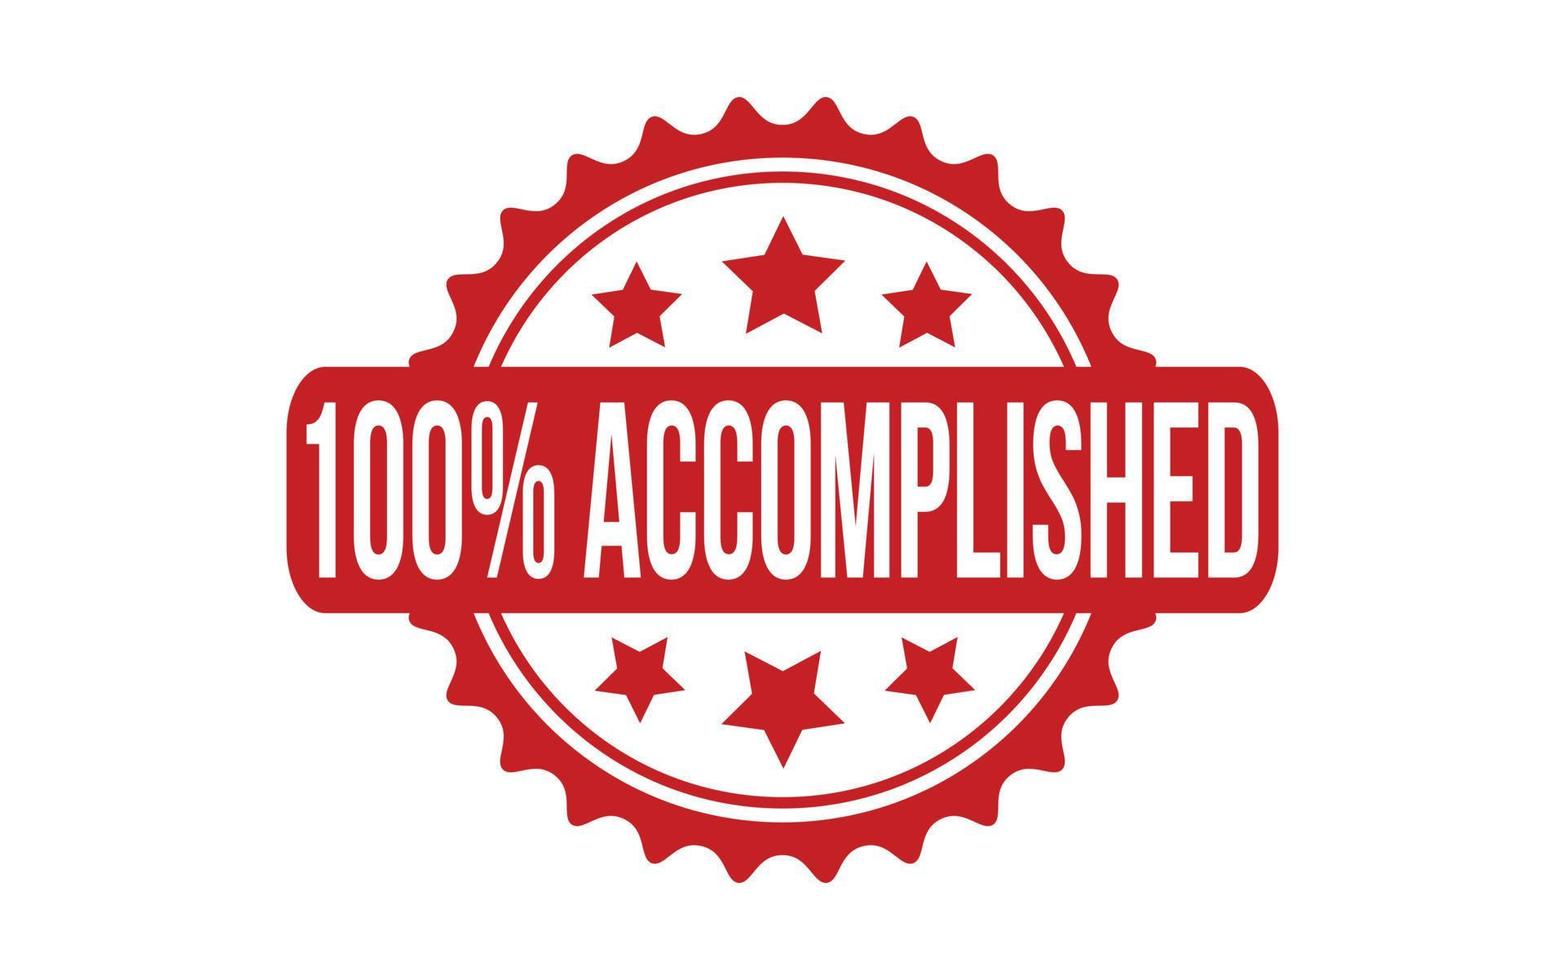 100 Percent Accomplished rubber stamp seal vector